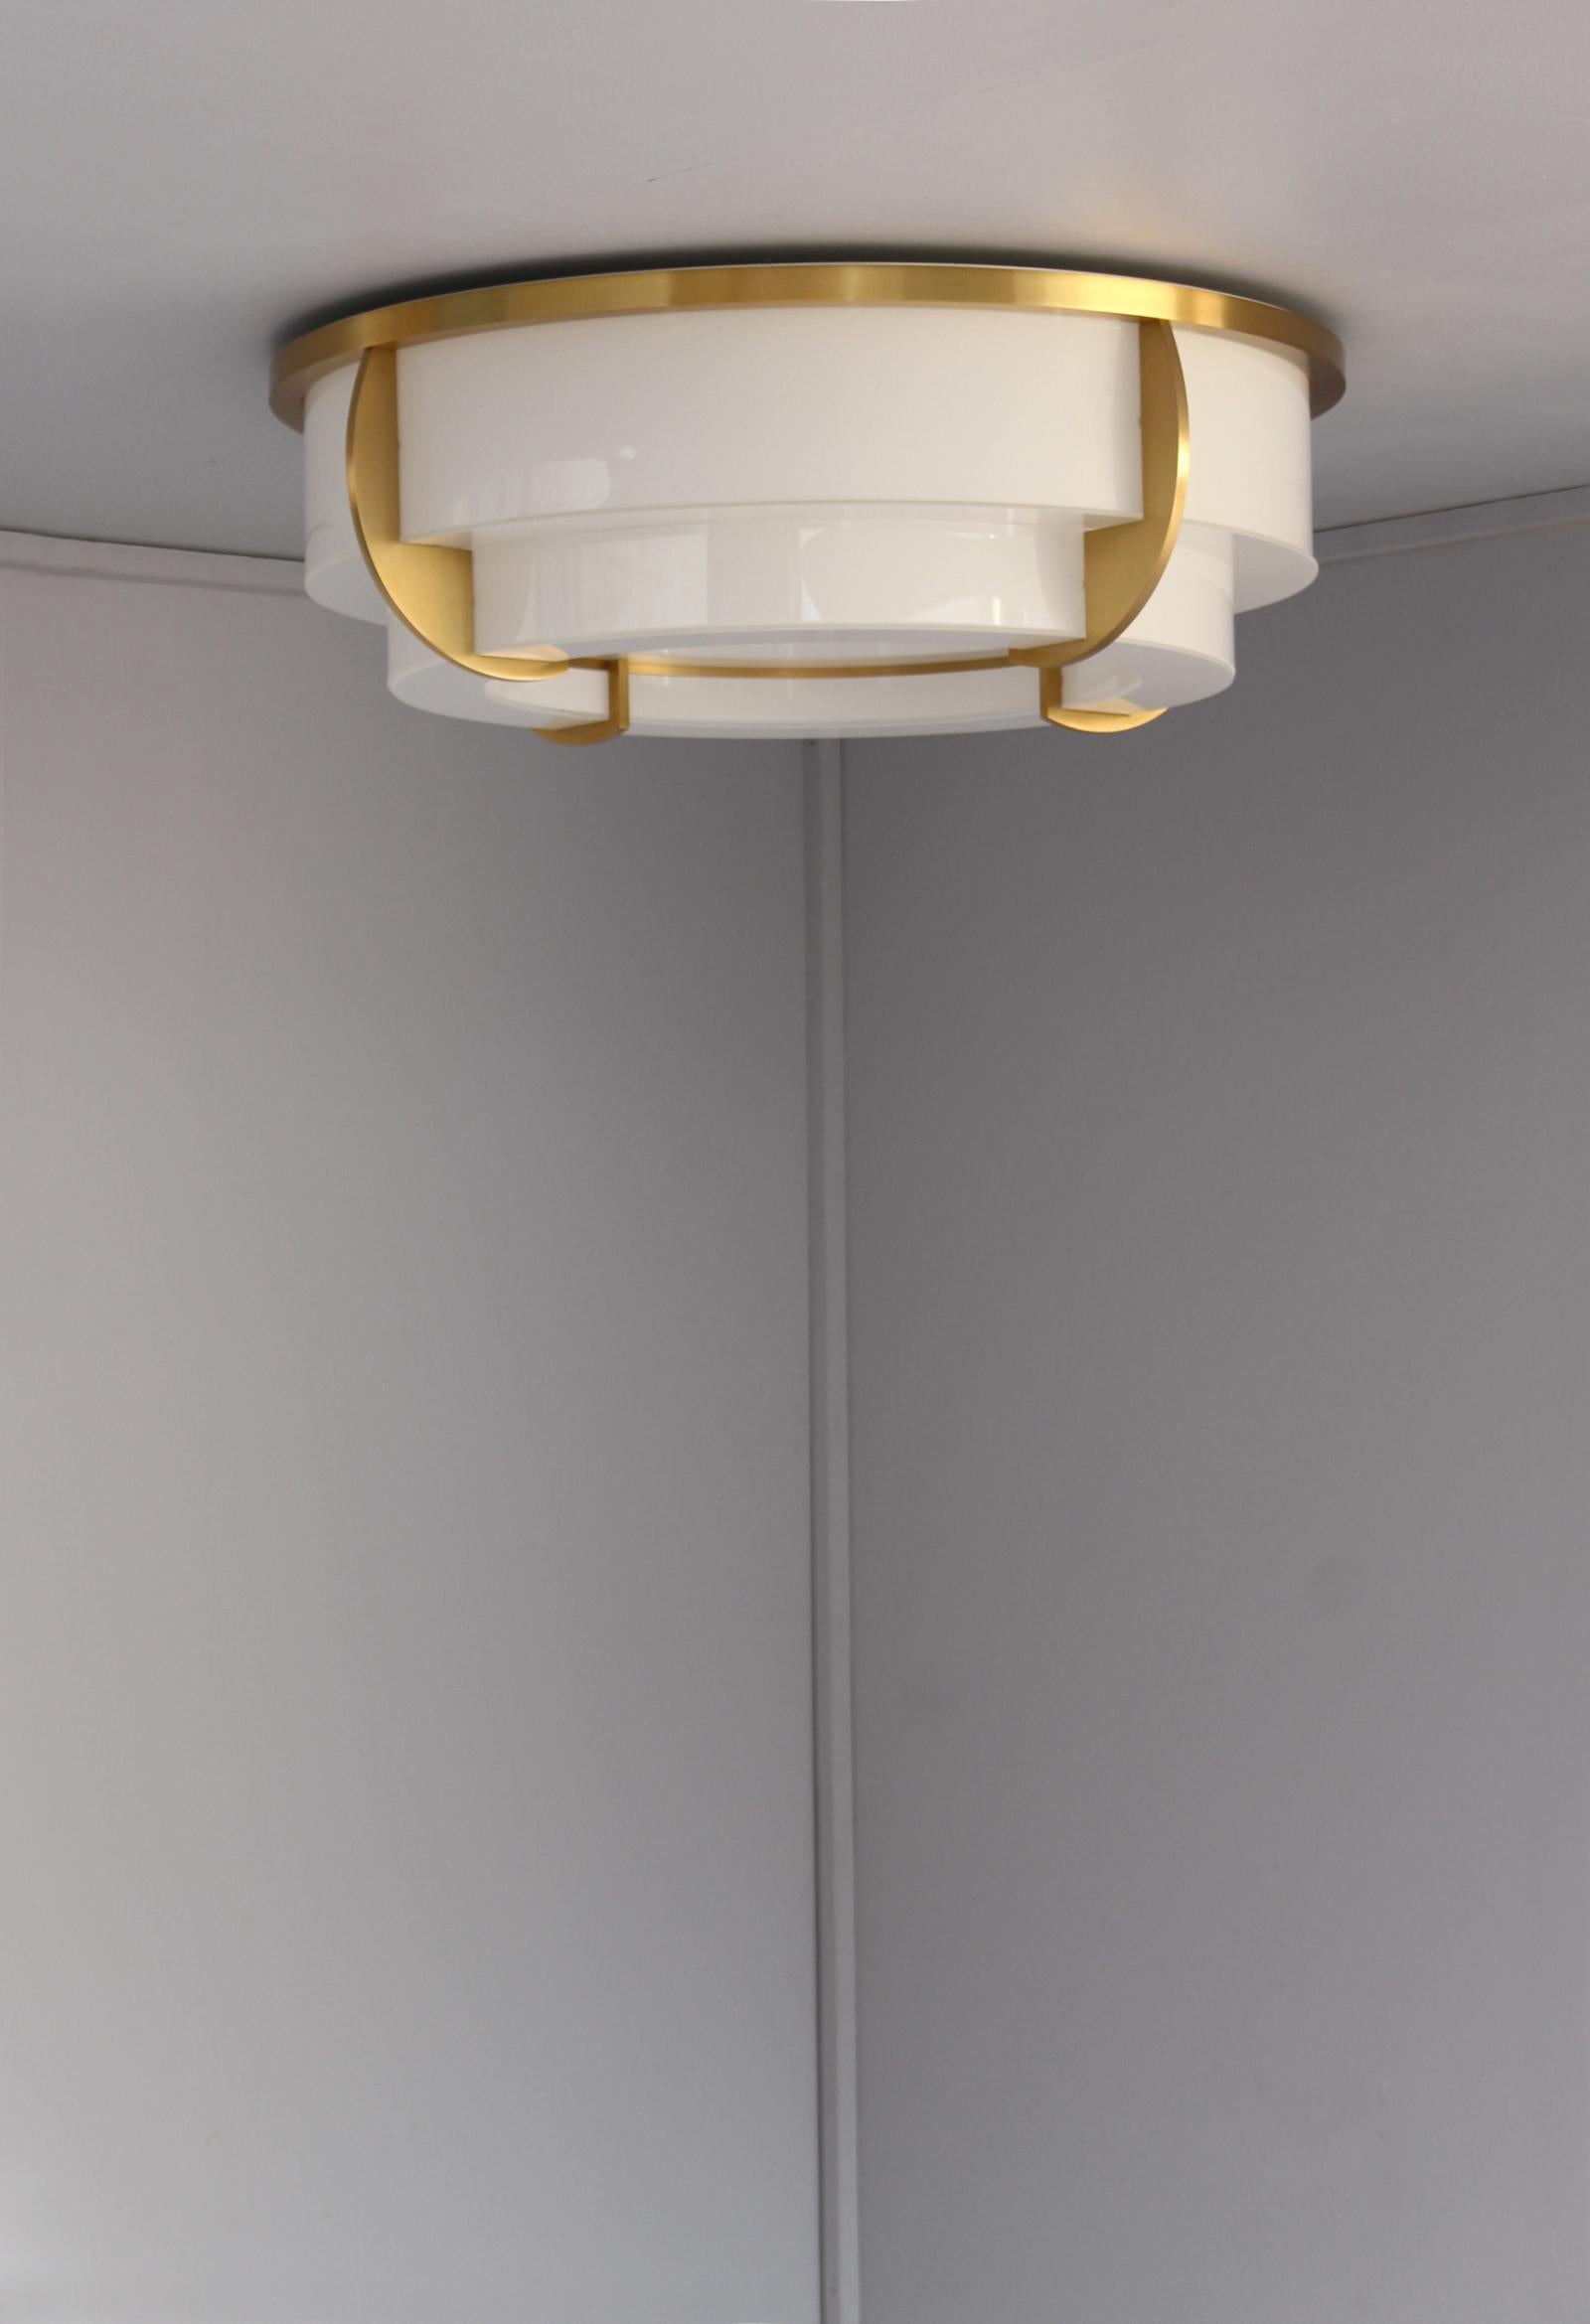 Jean Perzel - fine French Art Deco two-tiered round ceiling fixture with a gilded lacquered bronze frame which supports the bent and flat enameled white glass diffusers.
The flat bottom diffuser is removable in order to change the bulbs
This model